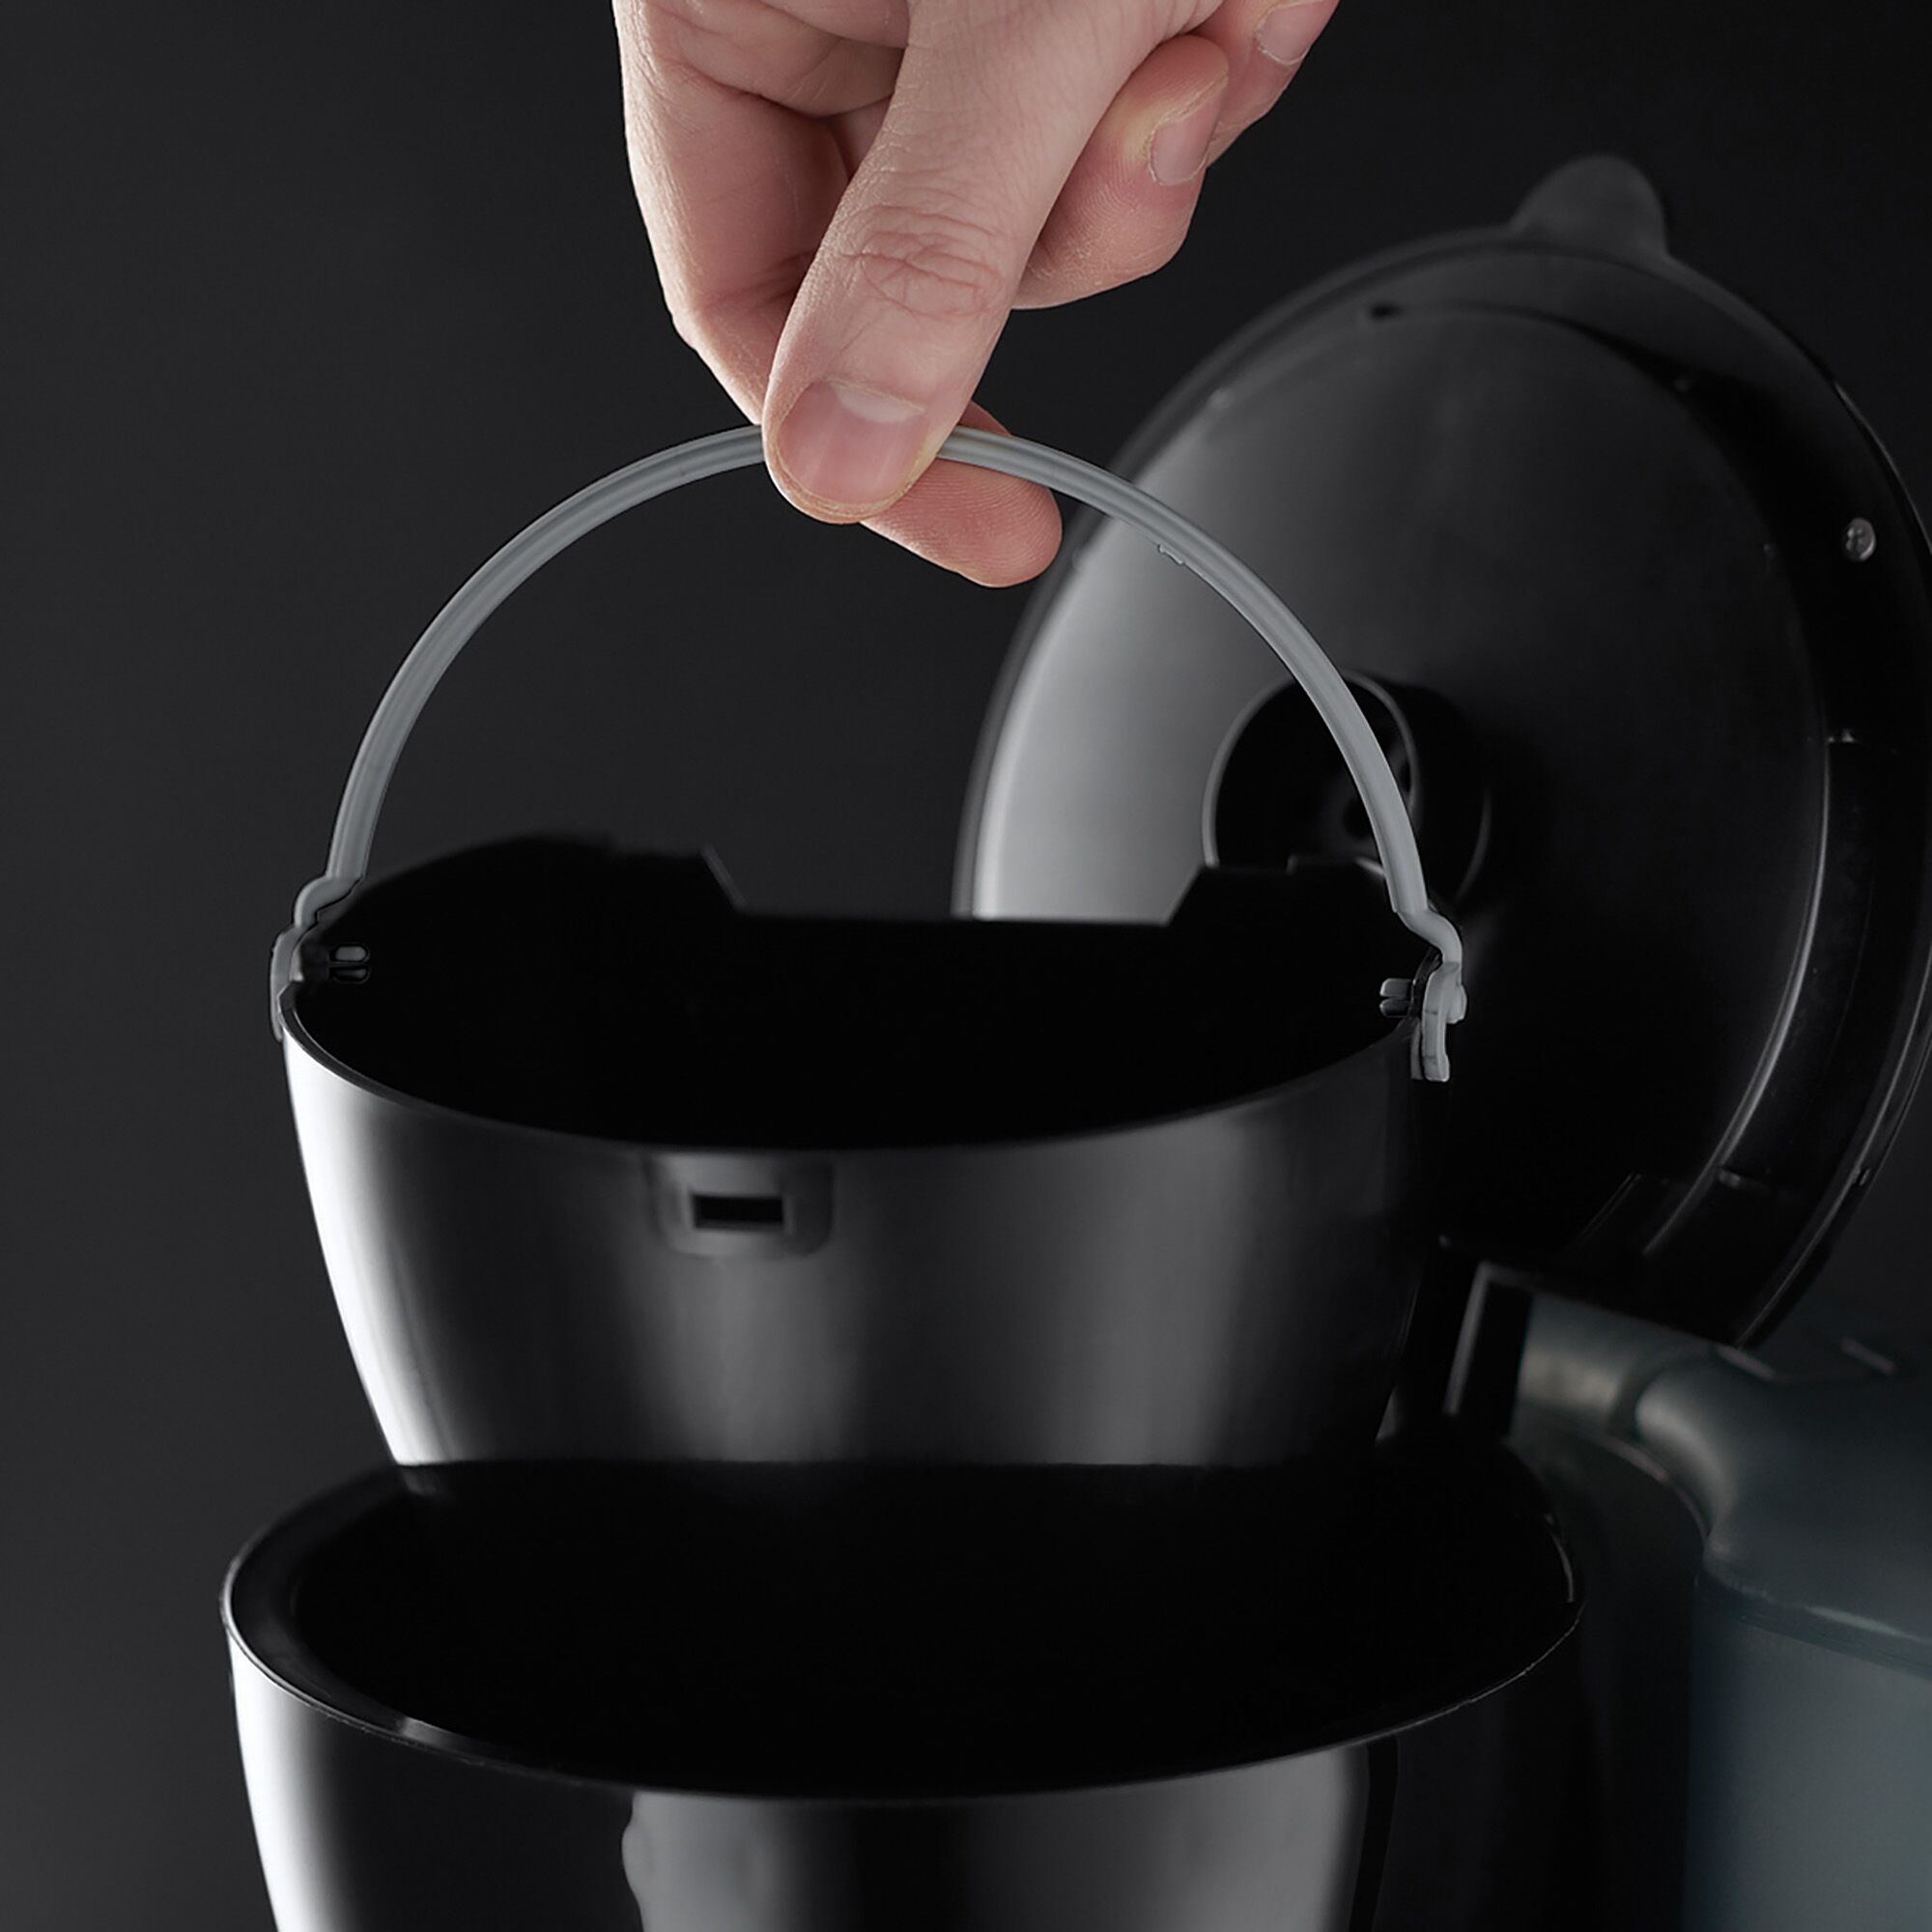 Removable water reservoir feature of easy 8 cup coffee maker.